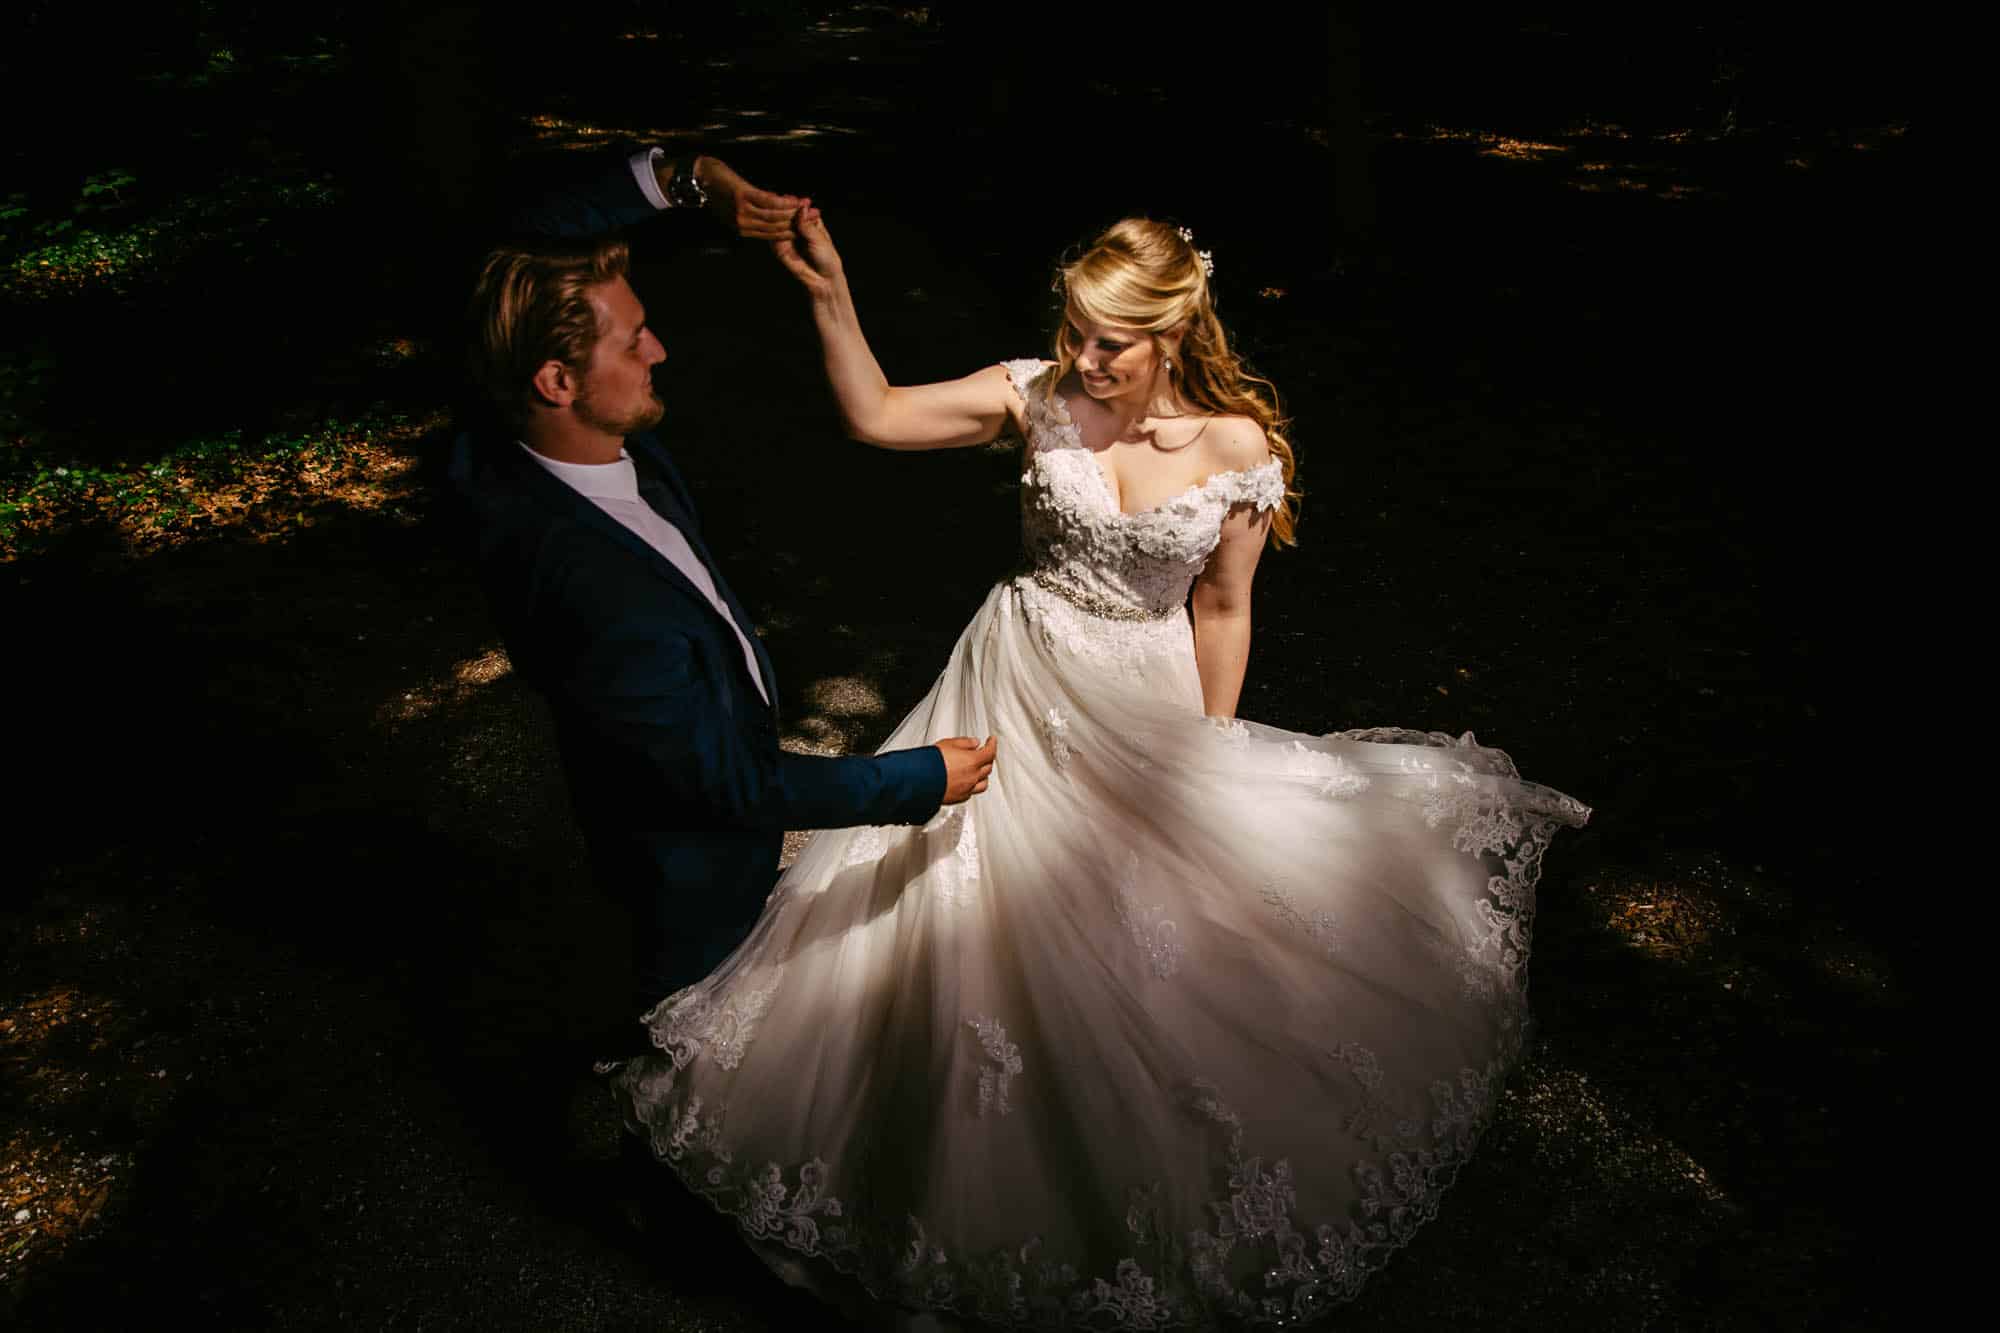 A bride in a beautiful A-line wedding dress and her groom dance gracefully through the enchanting forest.